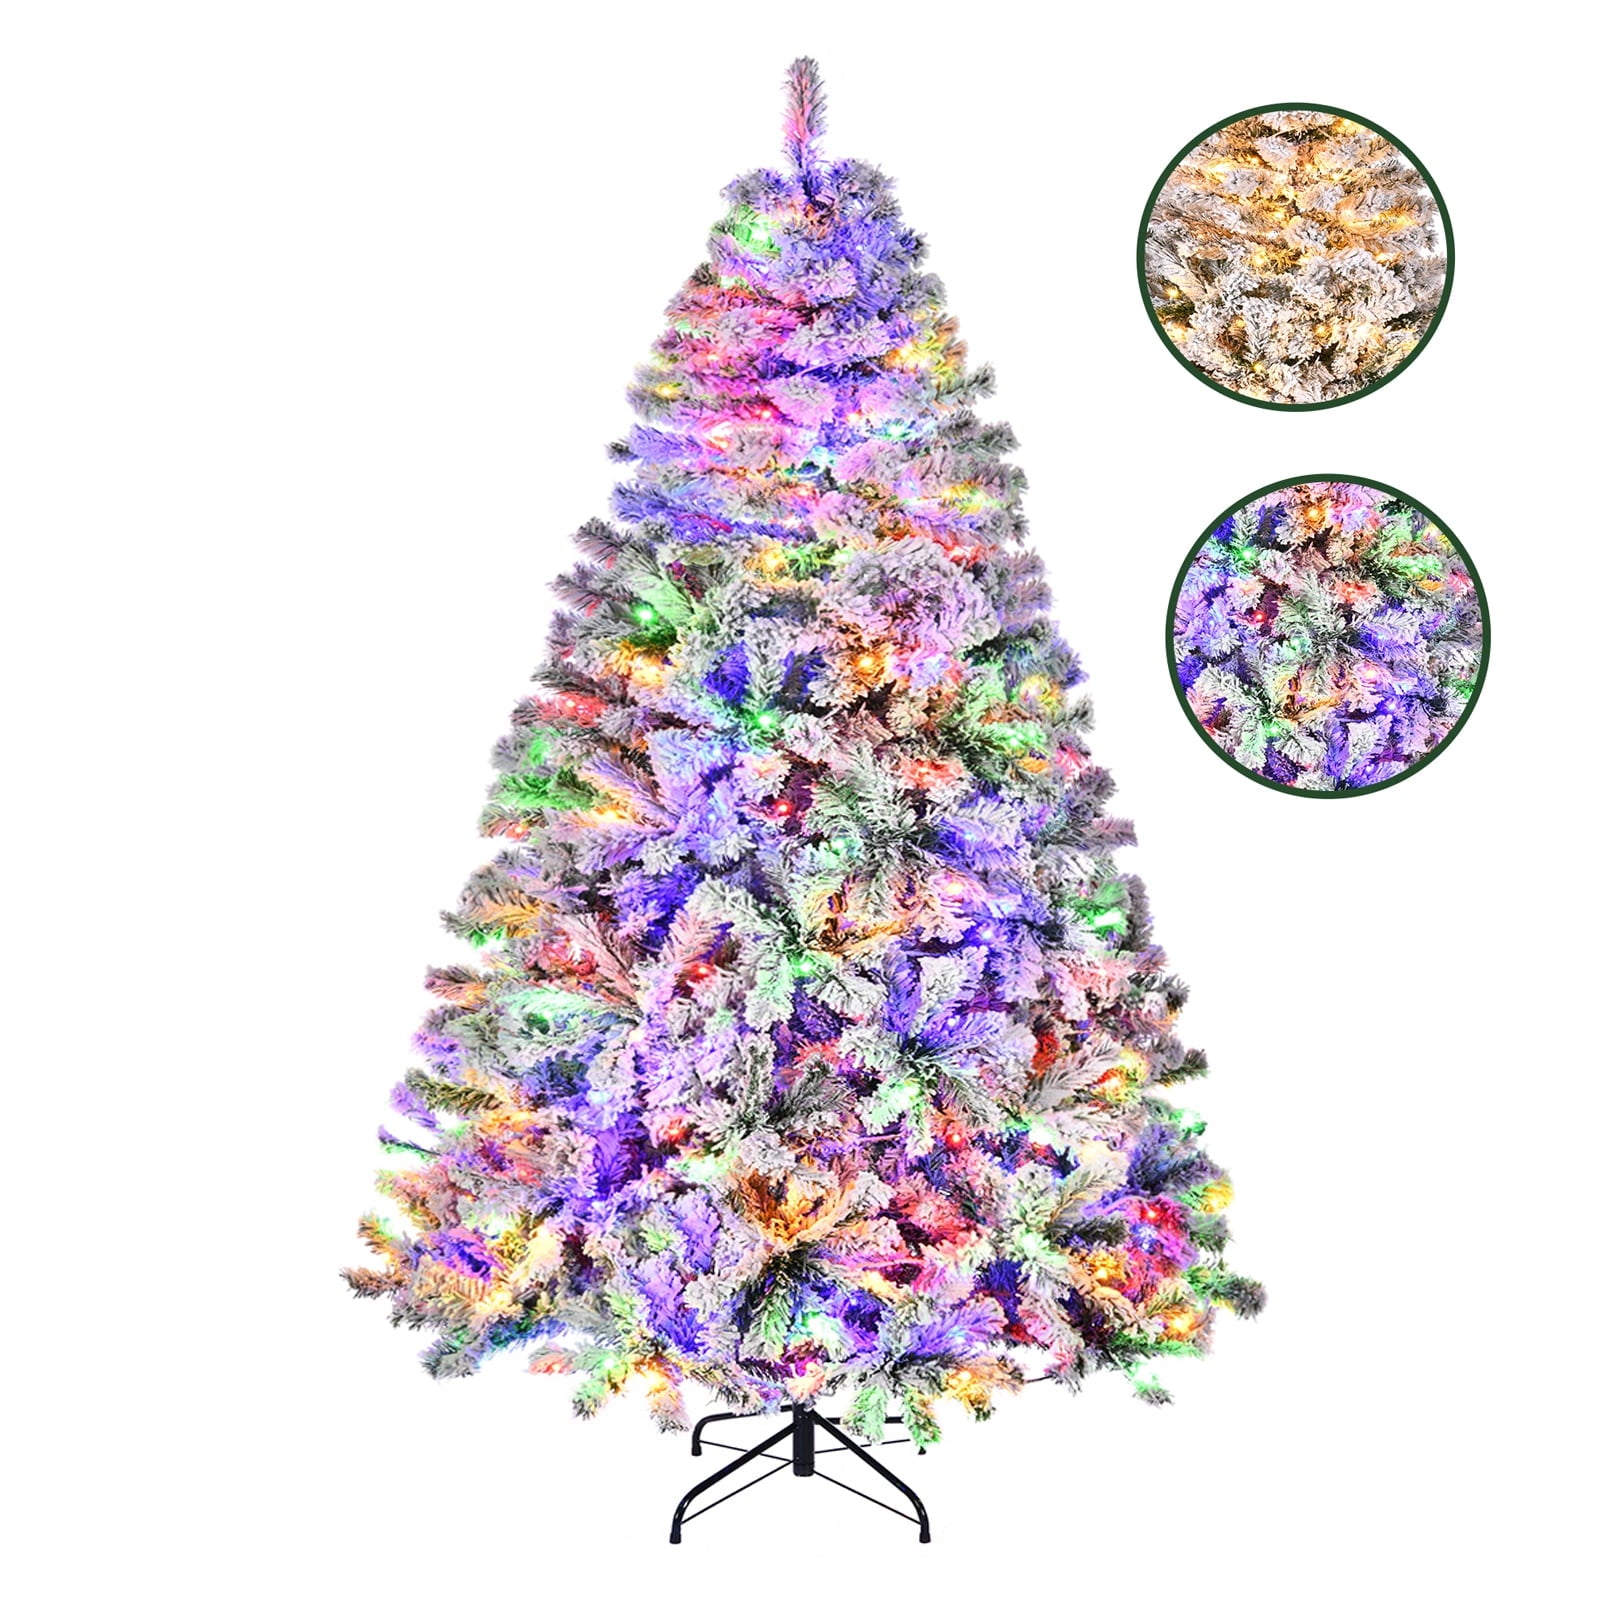 TBKLEY 7.5ft Prelit Snow Flocked Artificial Holiday Christmas Tree, 600 Warm White & Multi-Color Lights for Home, Office, Party Decoration, White